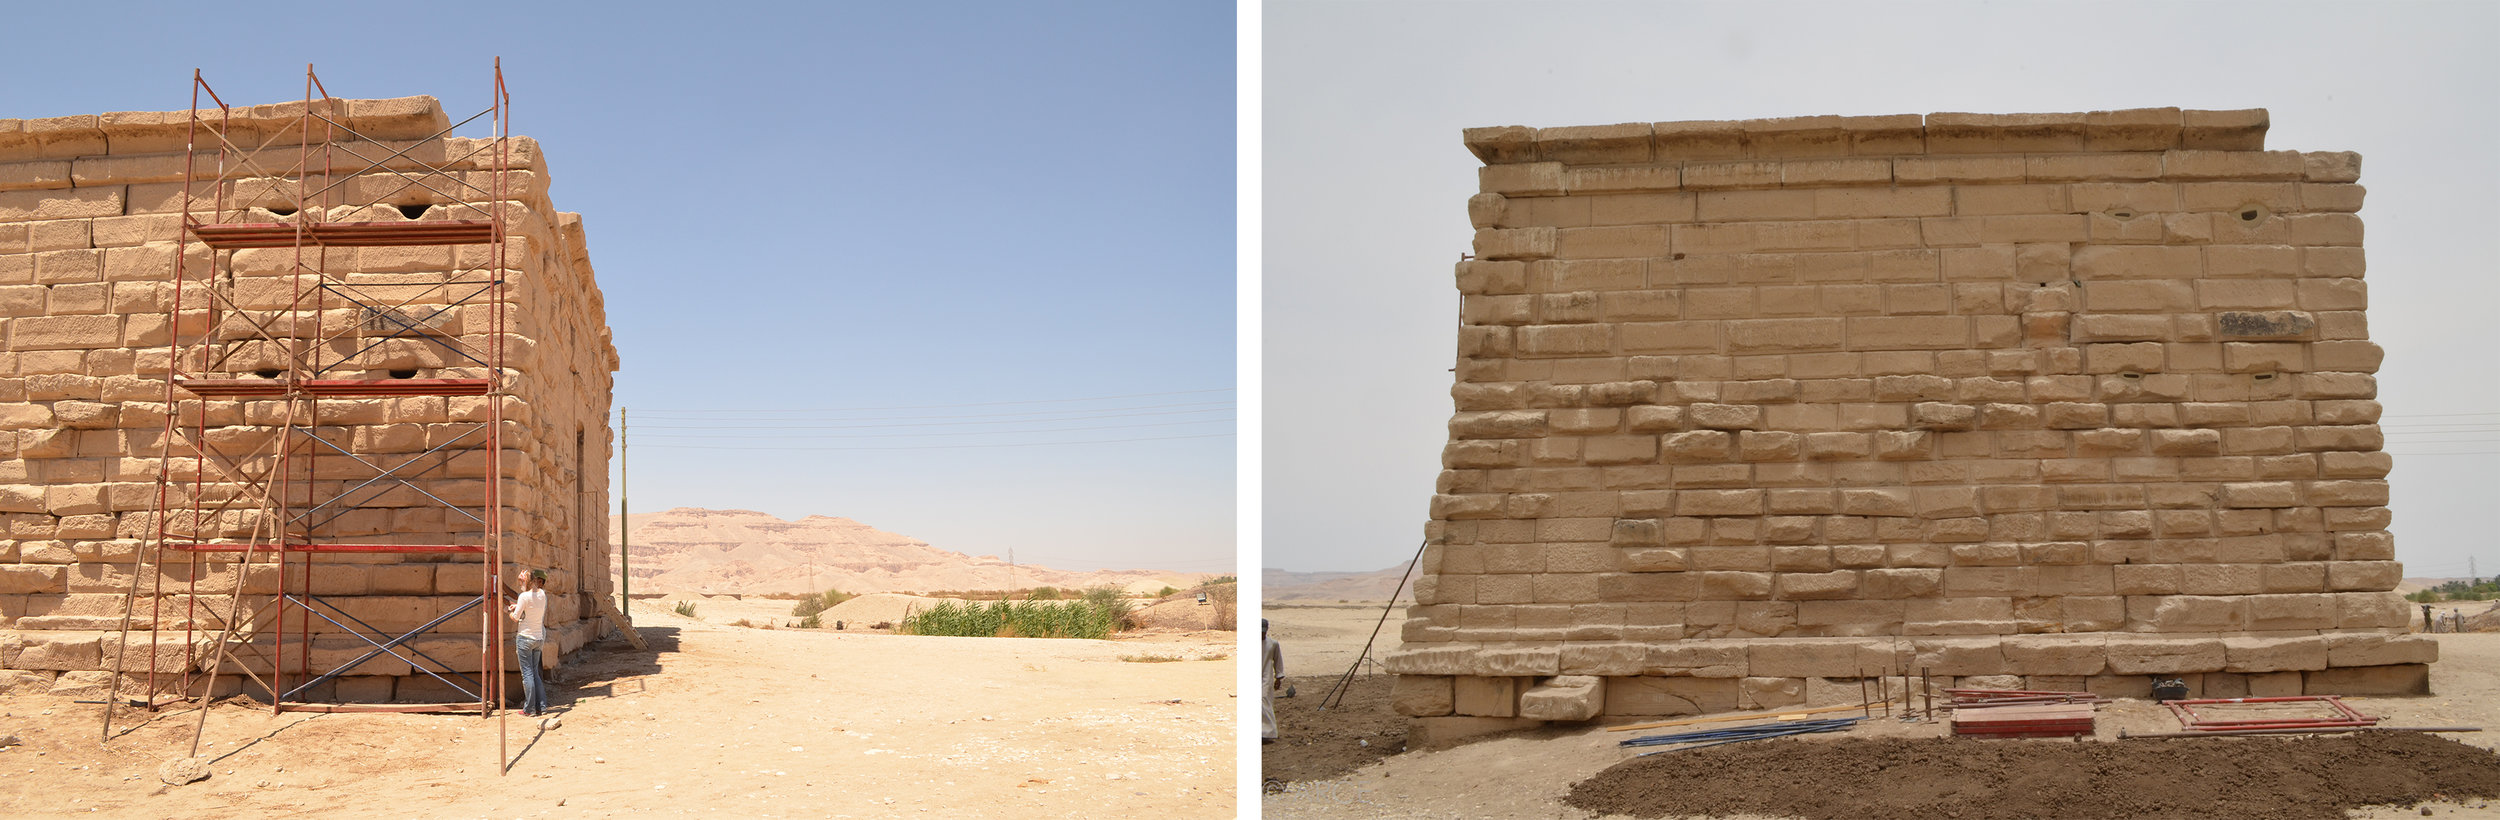  Window openings on the temple's south facade, shown before (left) and after (right) closure with screens.  Image © ARCE, 2012 